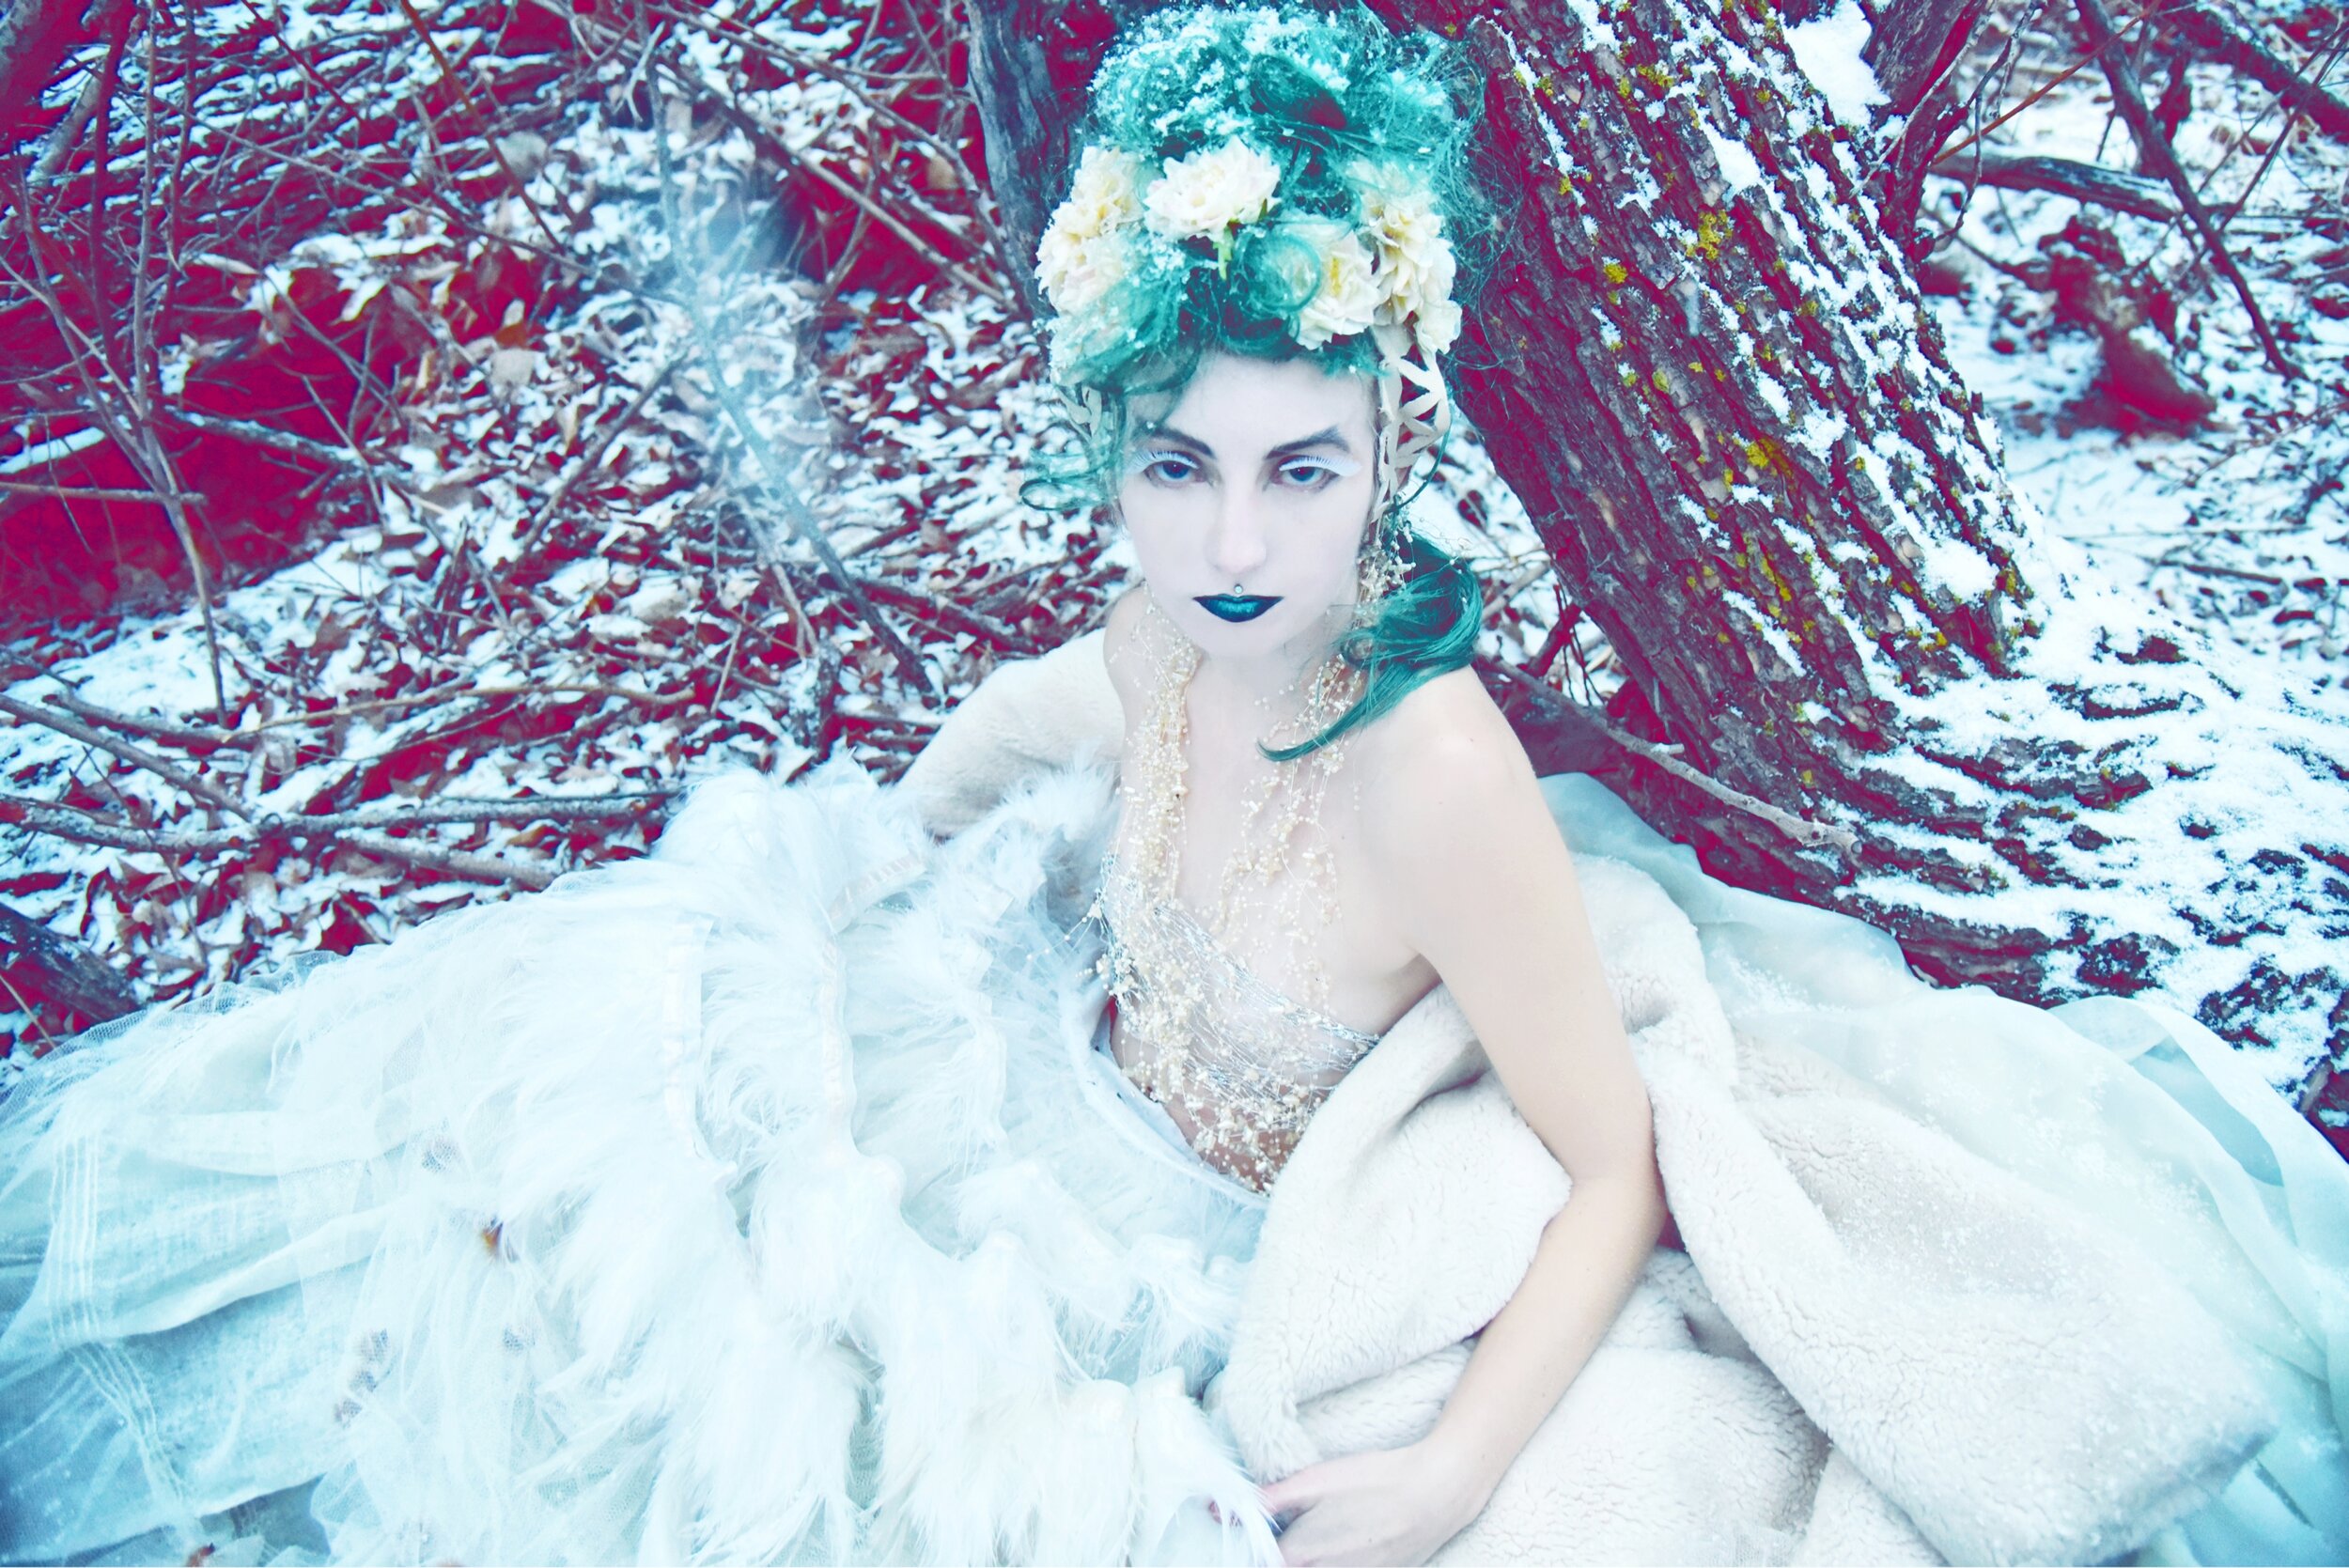 Sarah Bender Psychedelic Snow Queen Carly Carpenter Photography.jpg